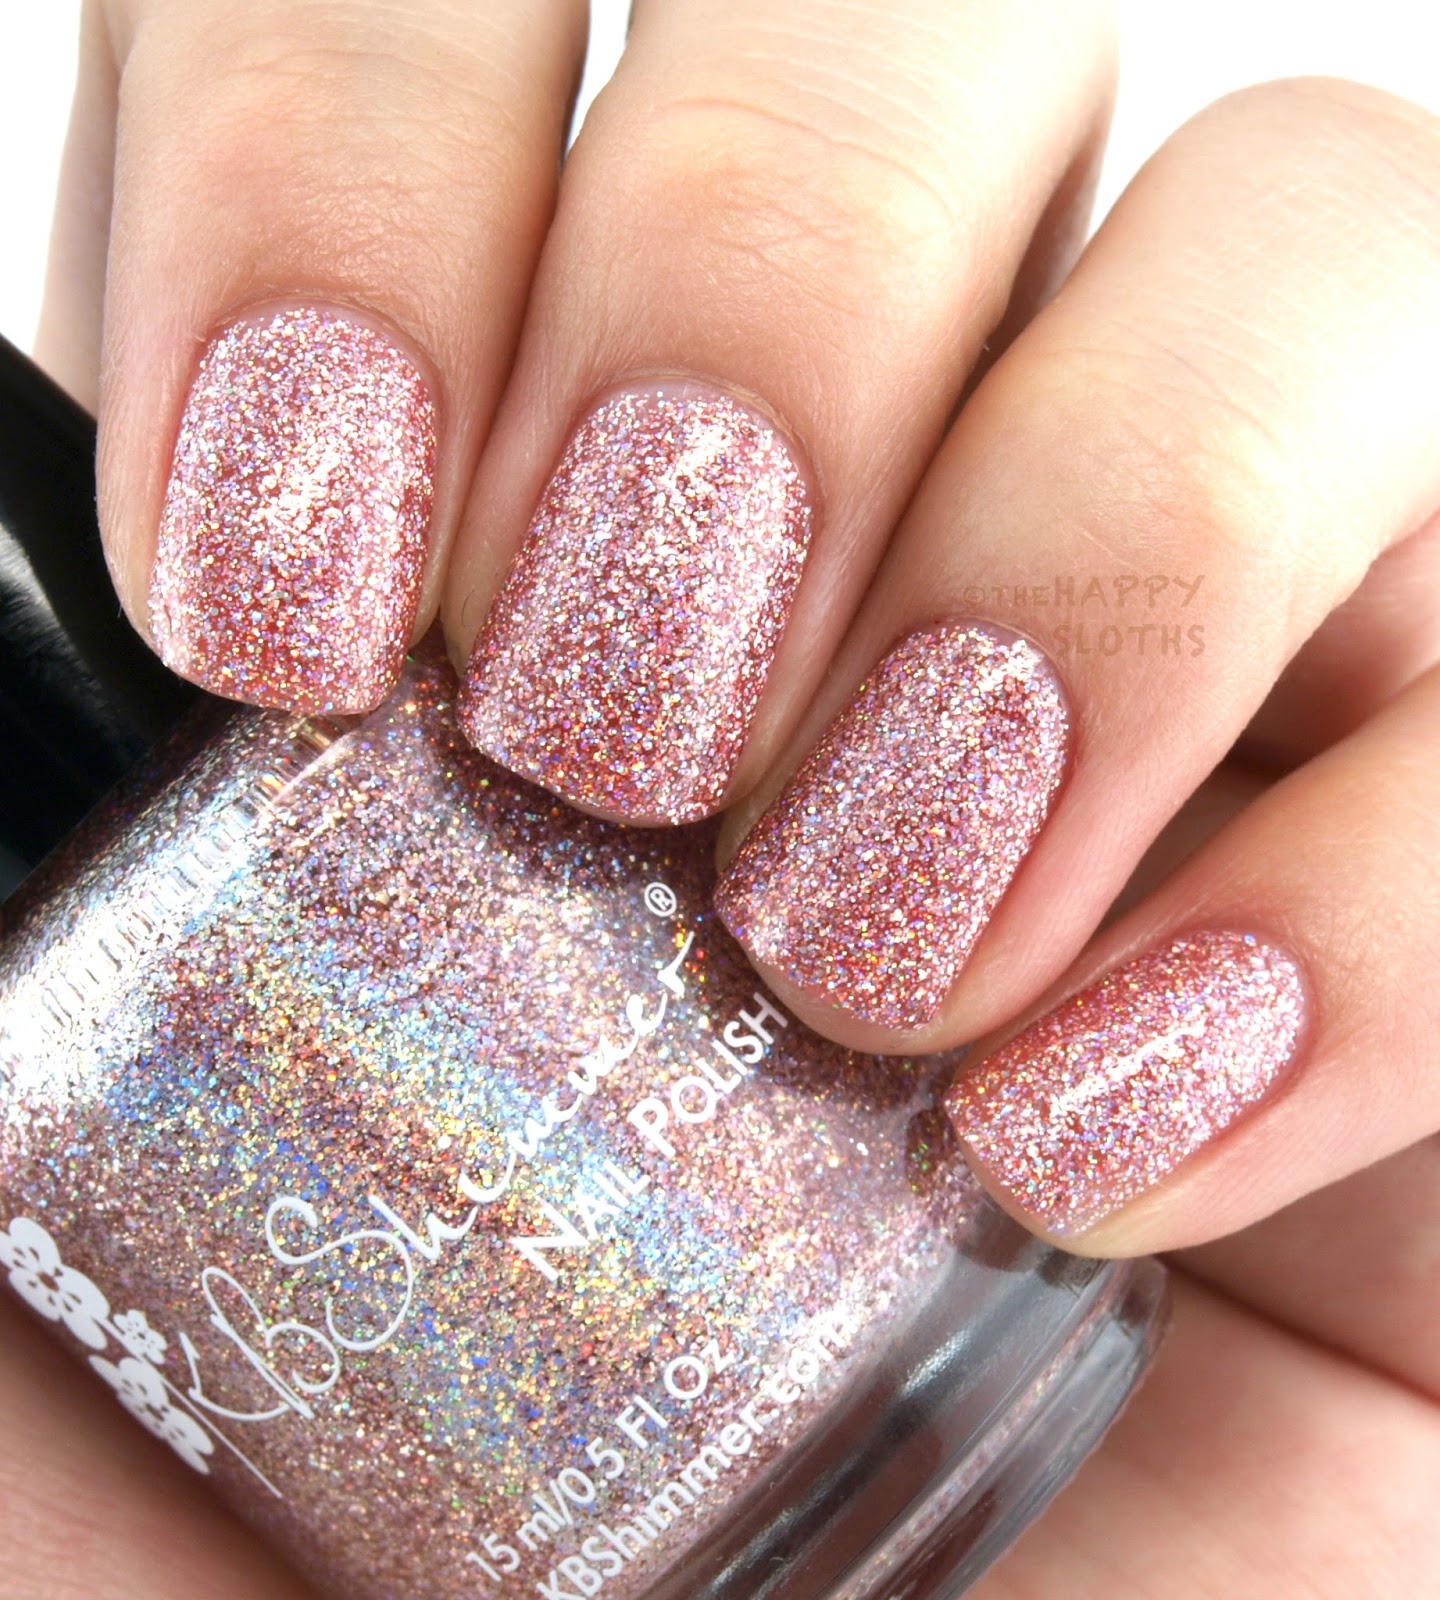 KBShimmer Fall 2016 Collection: Review and Swatches | The Happy Sloths ...